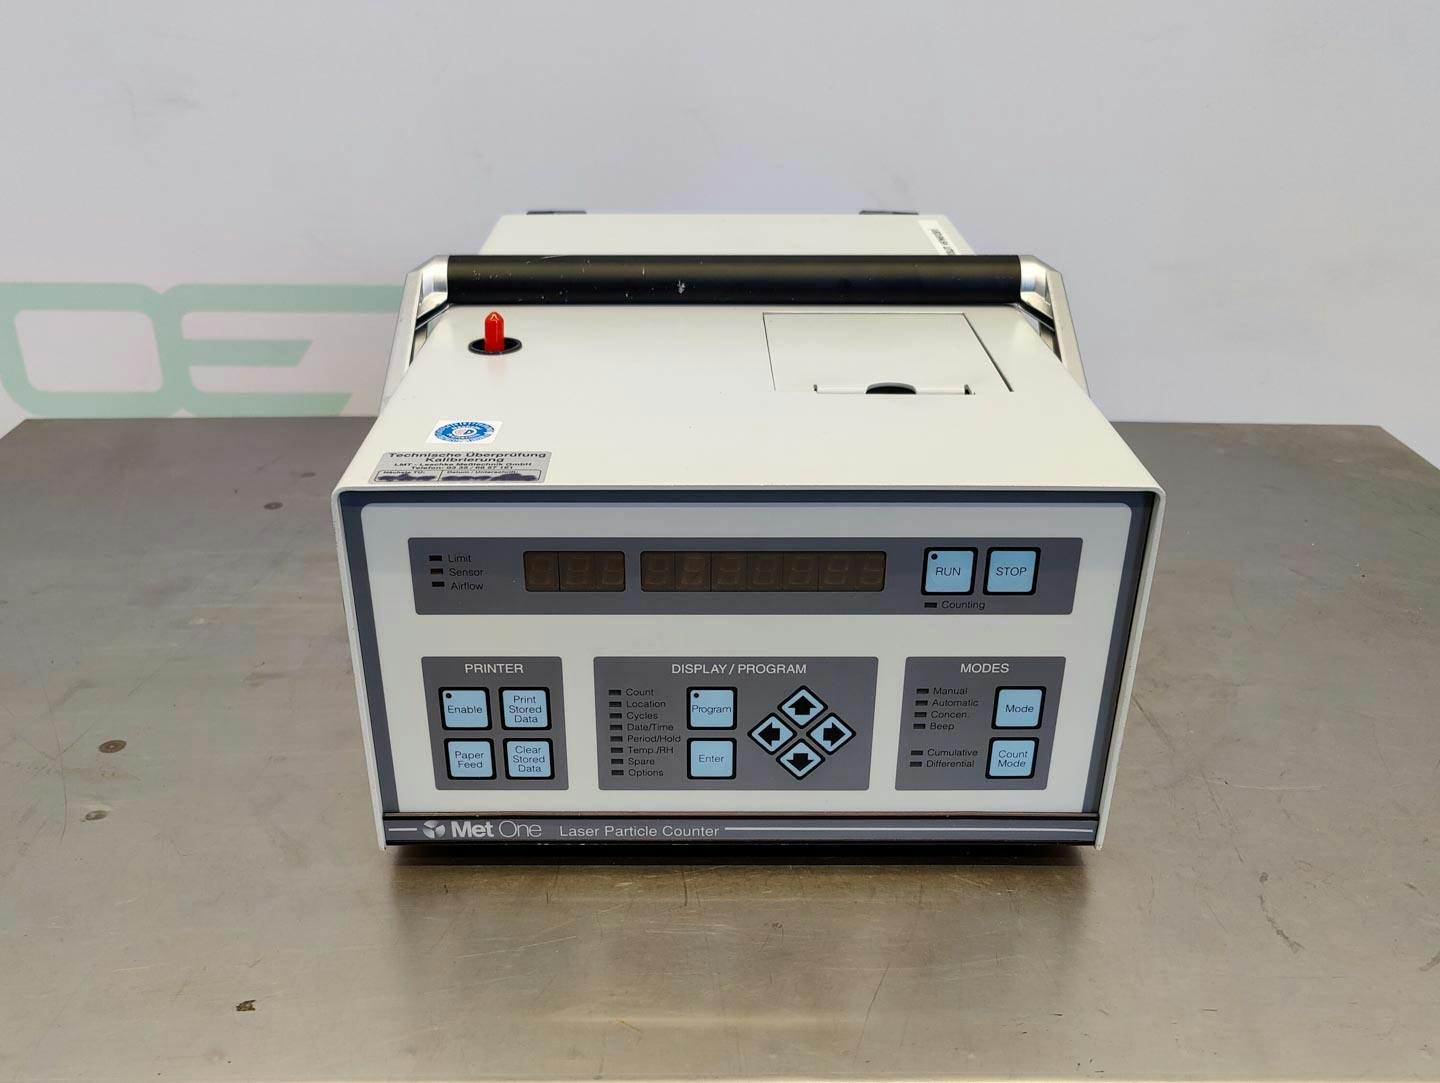 Met One A2408 "laser particle counter" - Varie